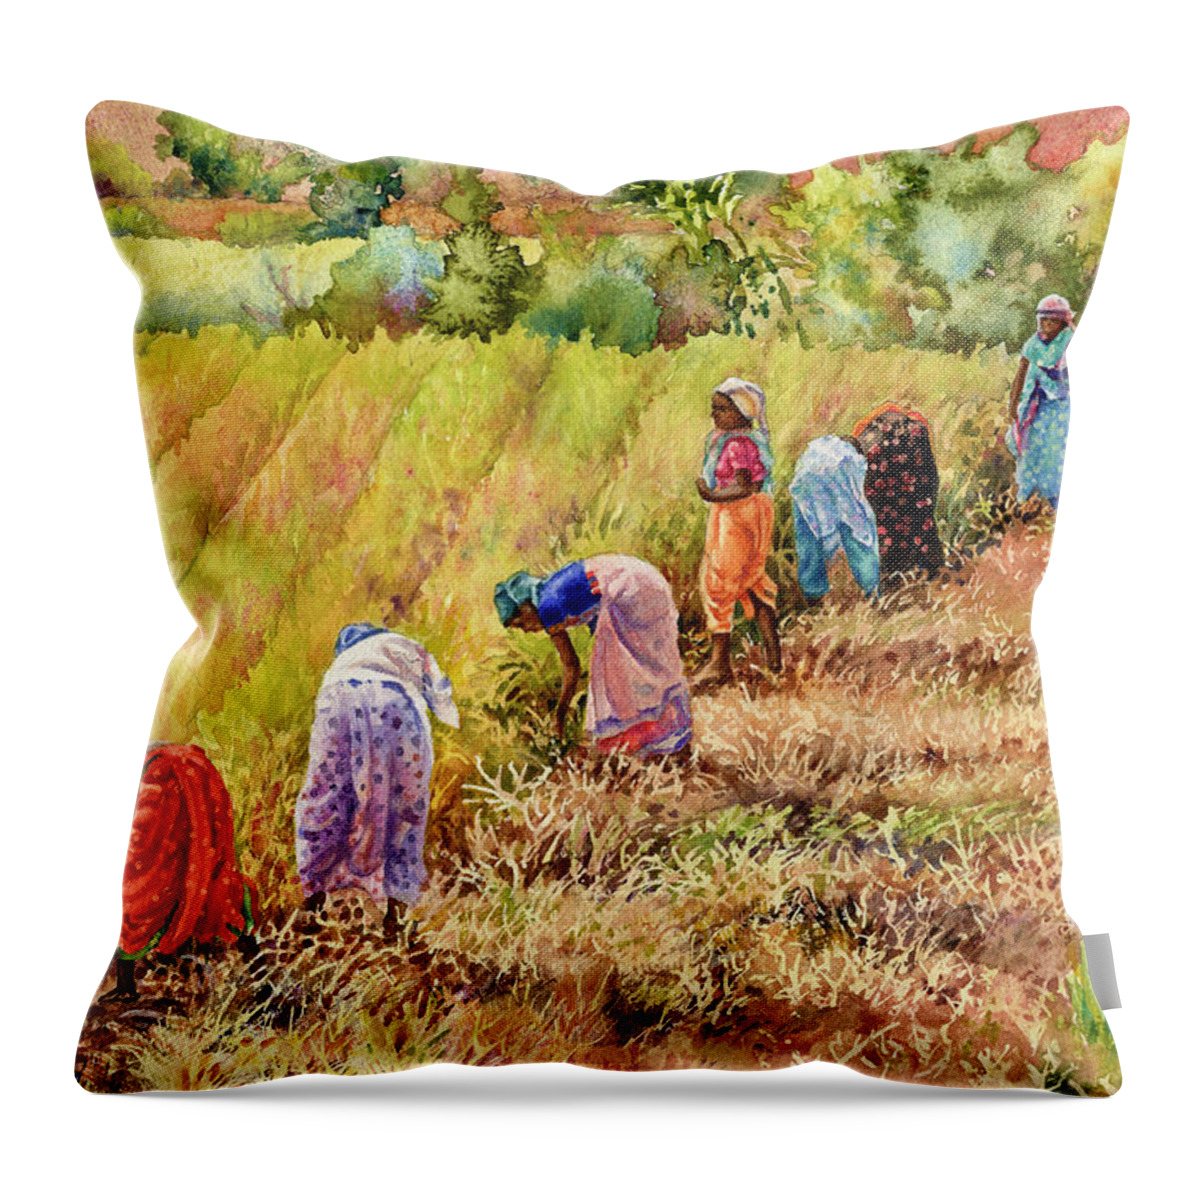 India Painting Throw Pillow featuring the painting Women at Work by Anne Gifford